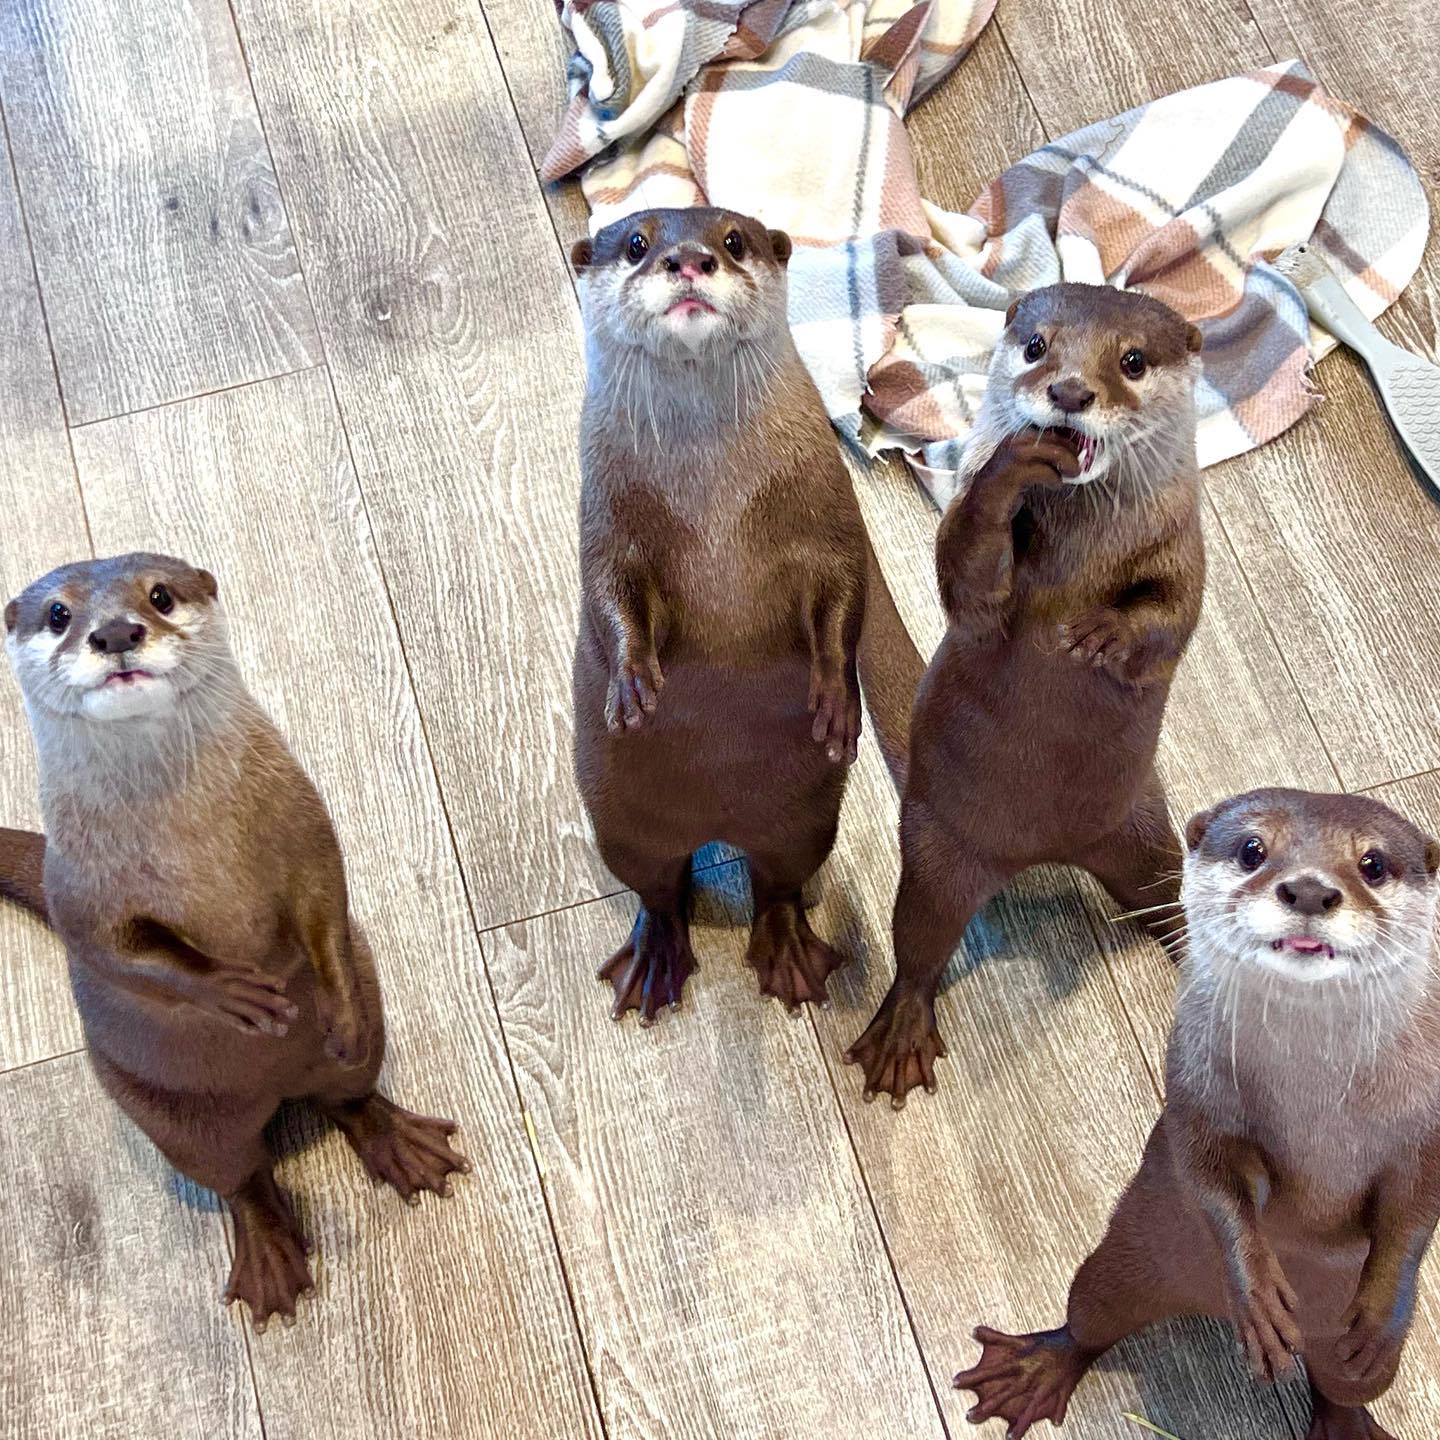 4 otters standing on hind legs watching camera